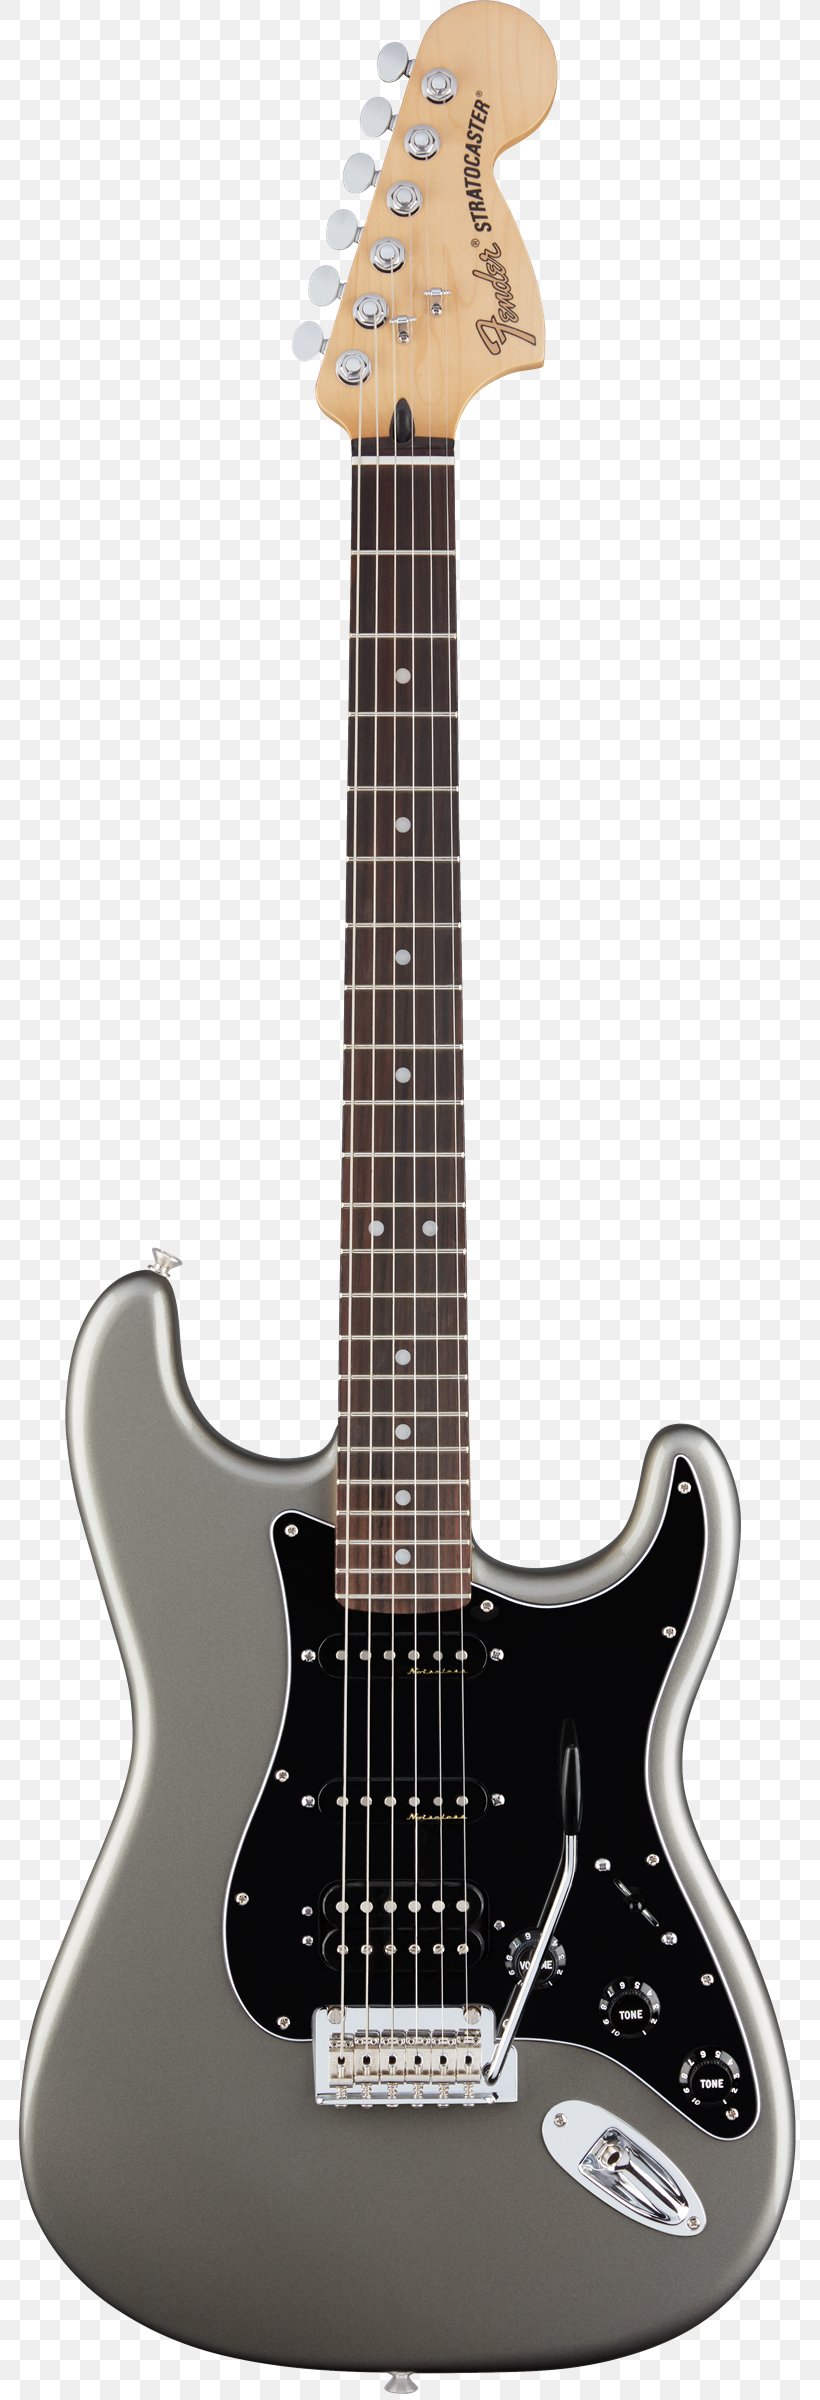 Fender Stratocaster Fender Telecaster Deluxe Fender Musical Instruments Corporation Guitar, PNG, 783x2400px, Fender Stratocaster, Acoustic Electric Guitar, Bass Guitar, Electric Guitar, Electronic Musical Instrument Download Free